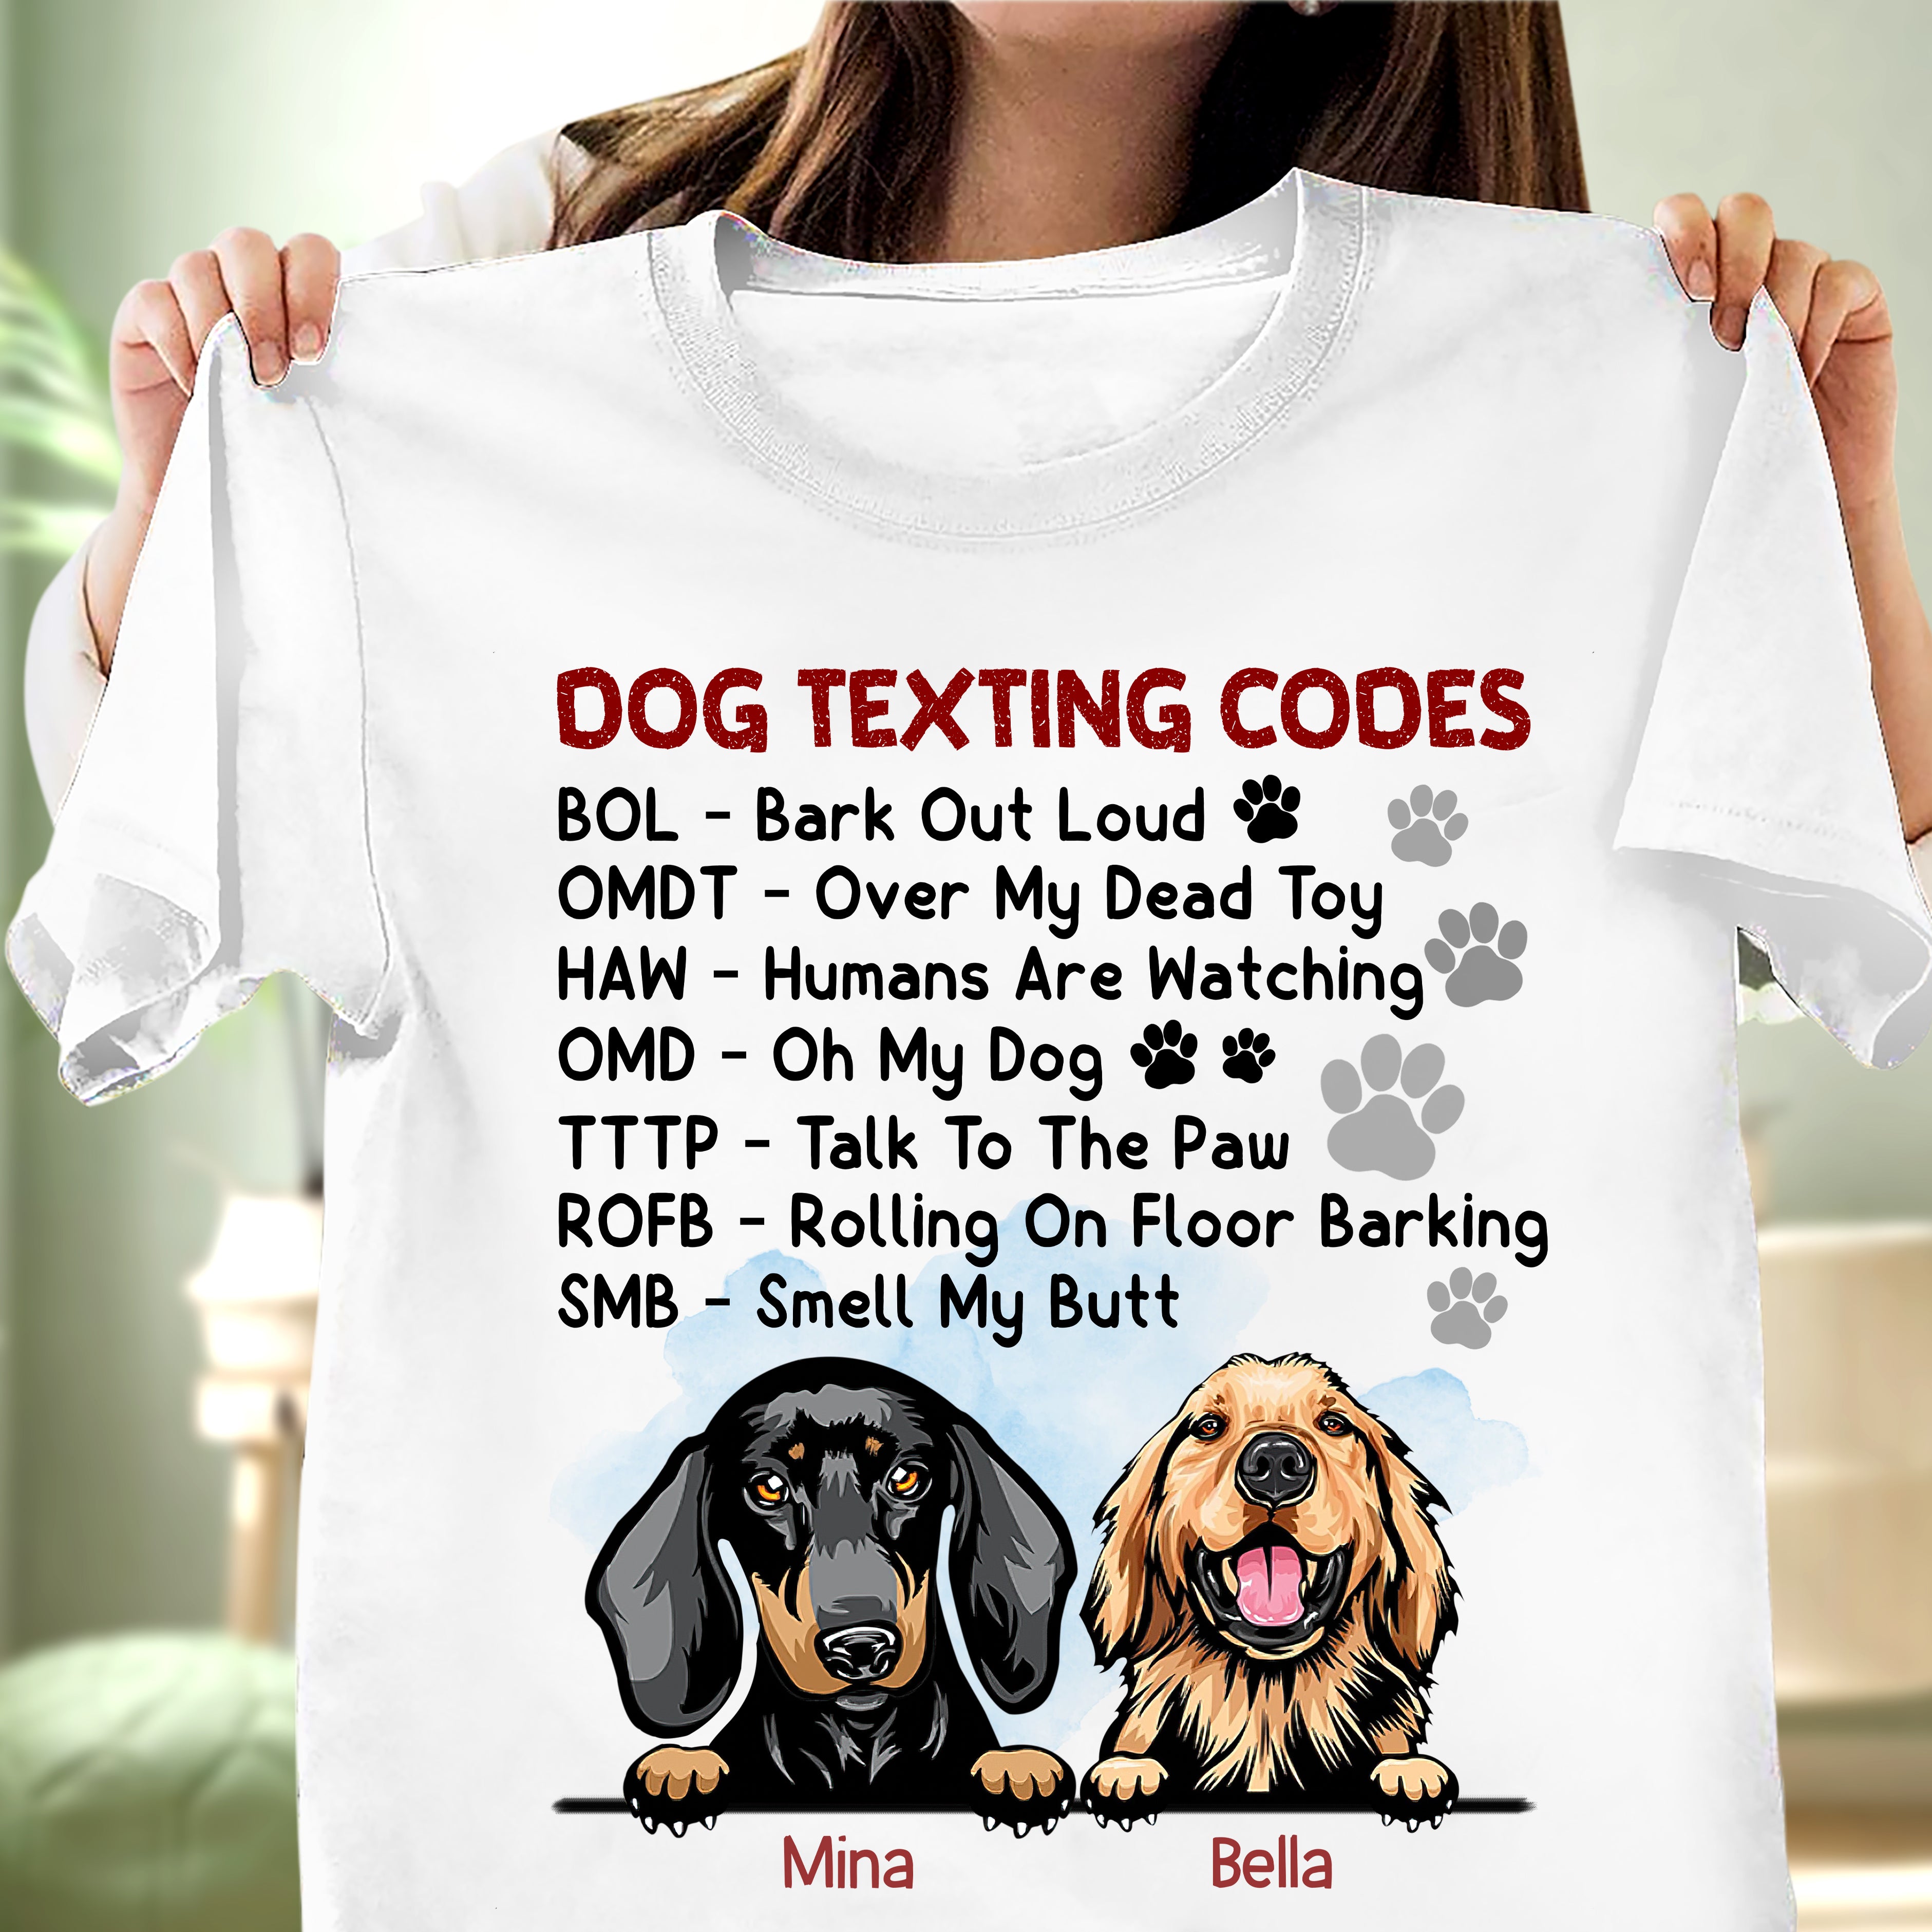 Dog Texting Codes Personalized Shirt, Personalized Gift for Dog Lovers, Dog Dad, Dog Mom